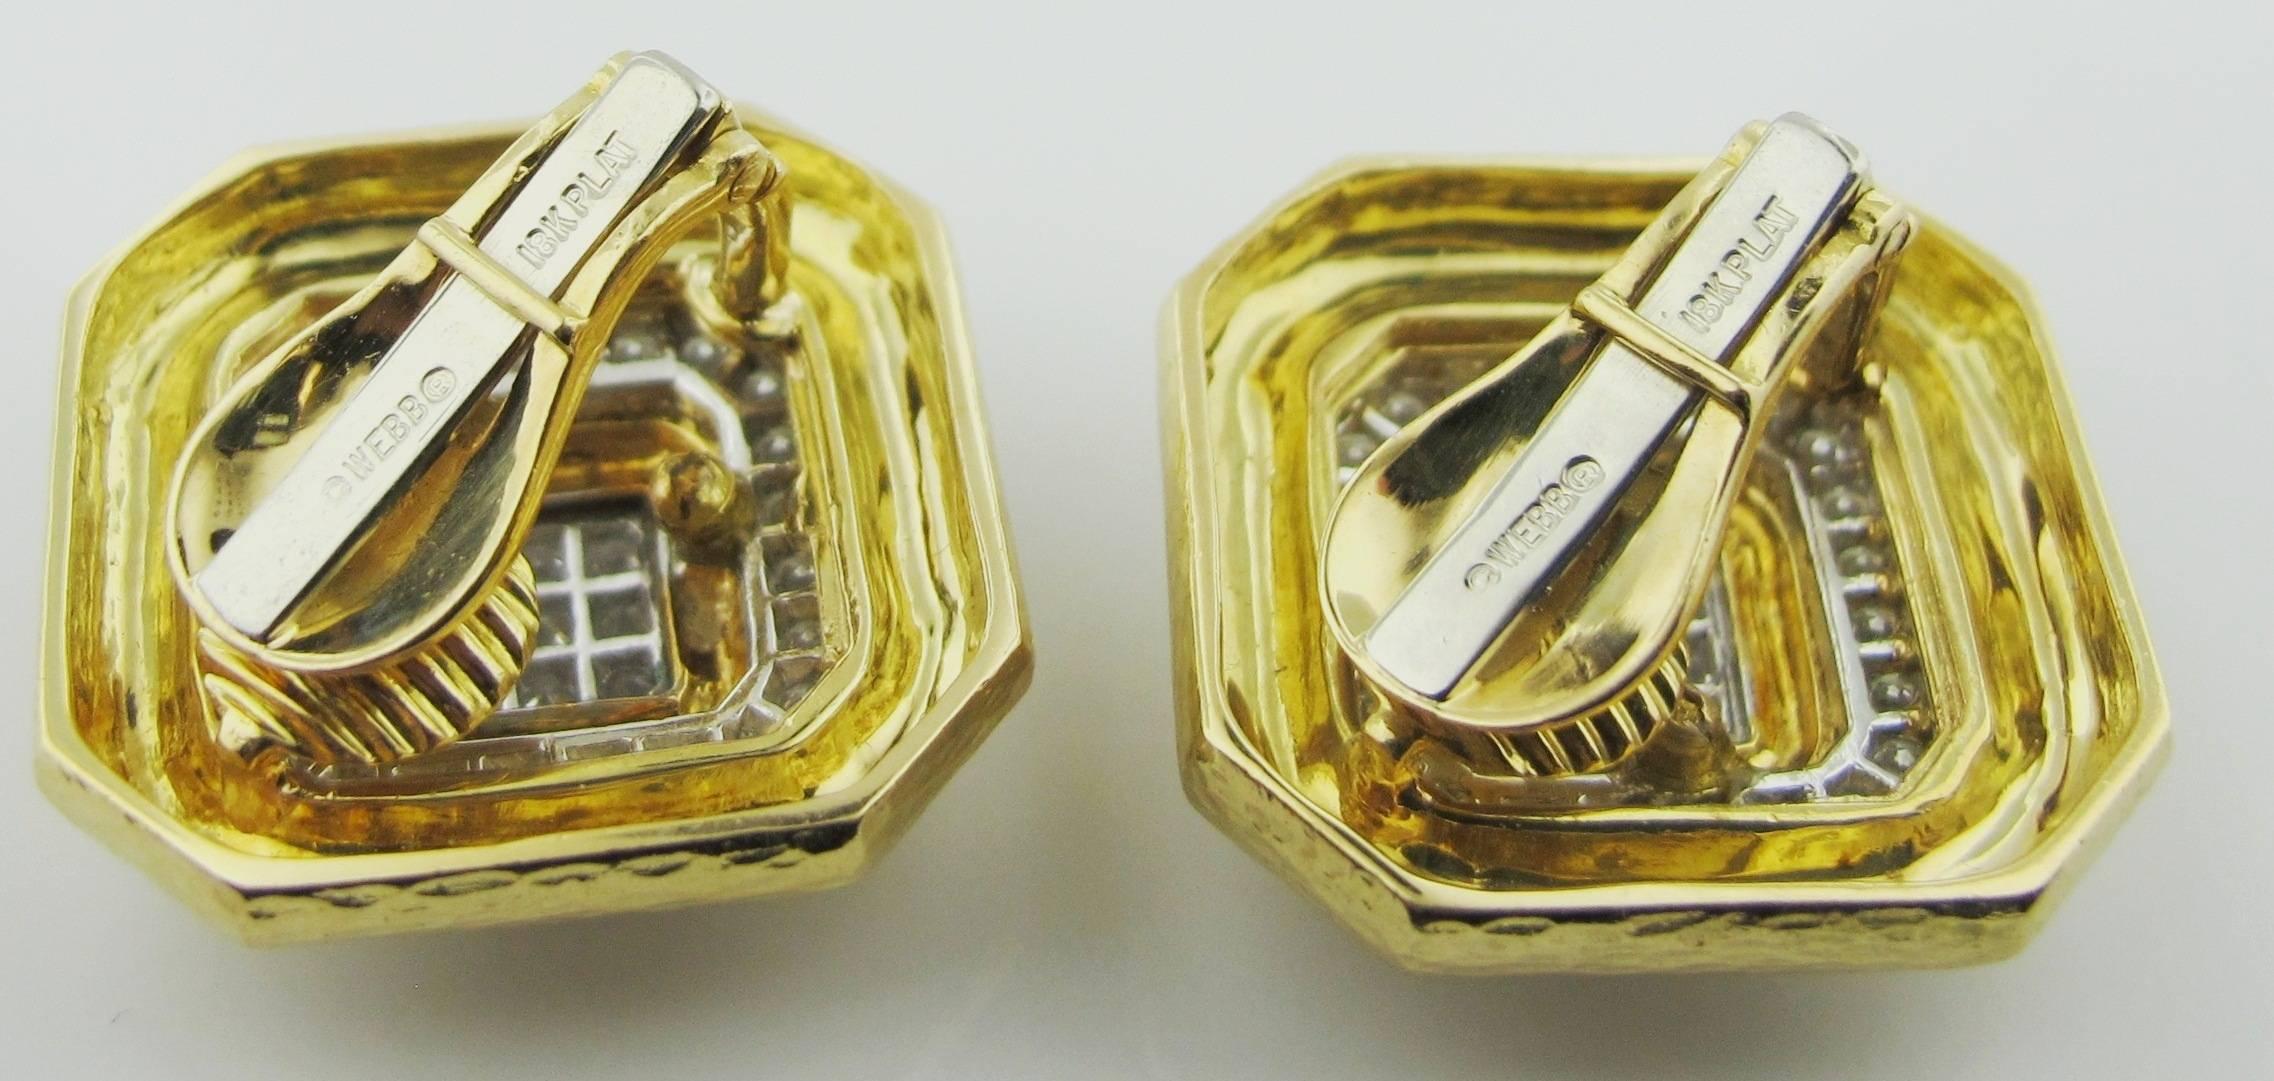 Signed David Webb Pave Diamond 18 karat Yellow Gold and platinum clip on earrings.  These earrings contain 70 Diamonds with a total diamond weight of 3.00 carats, FG color, VVS clairity. Gold weighs 32 grams.  In original David Webb box.